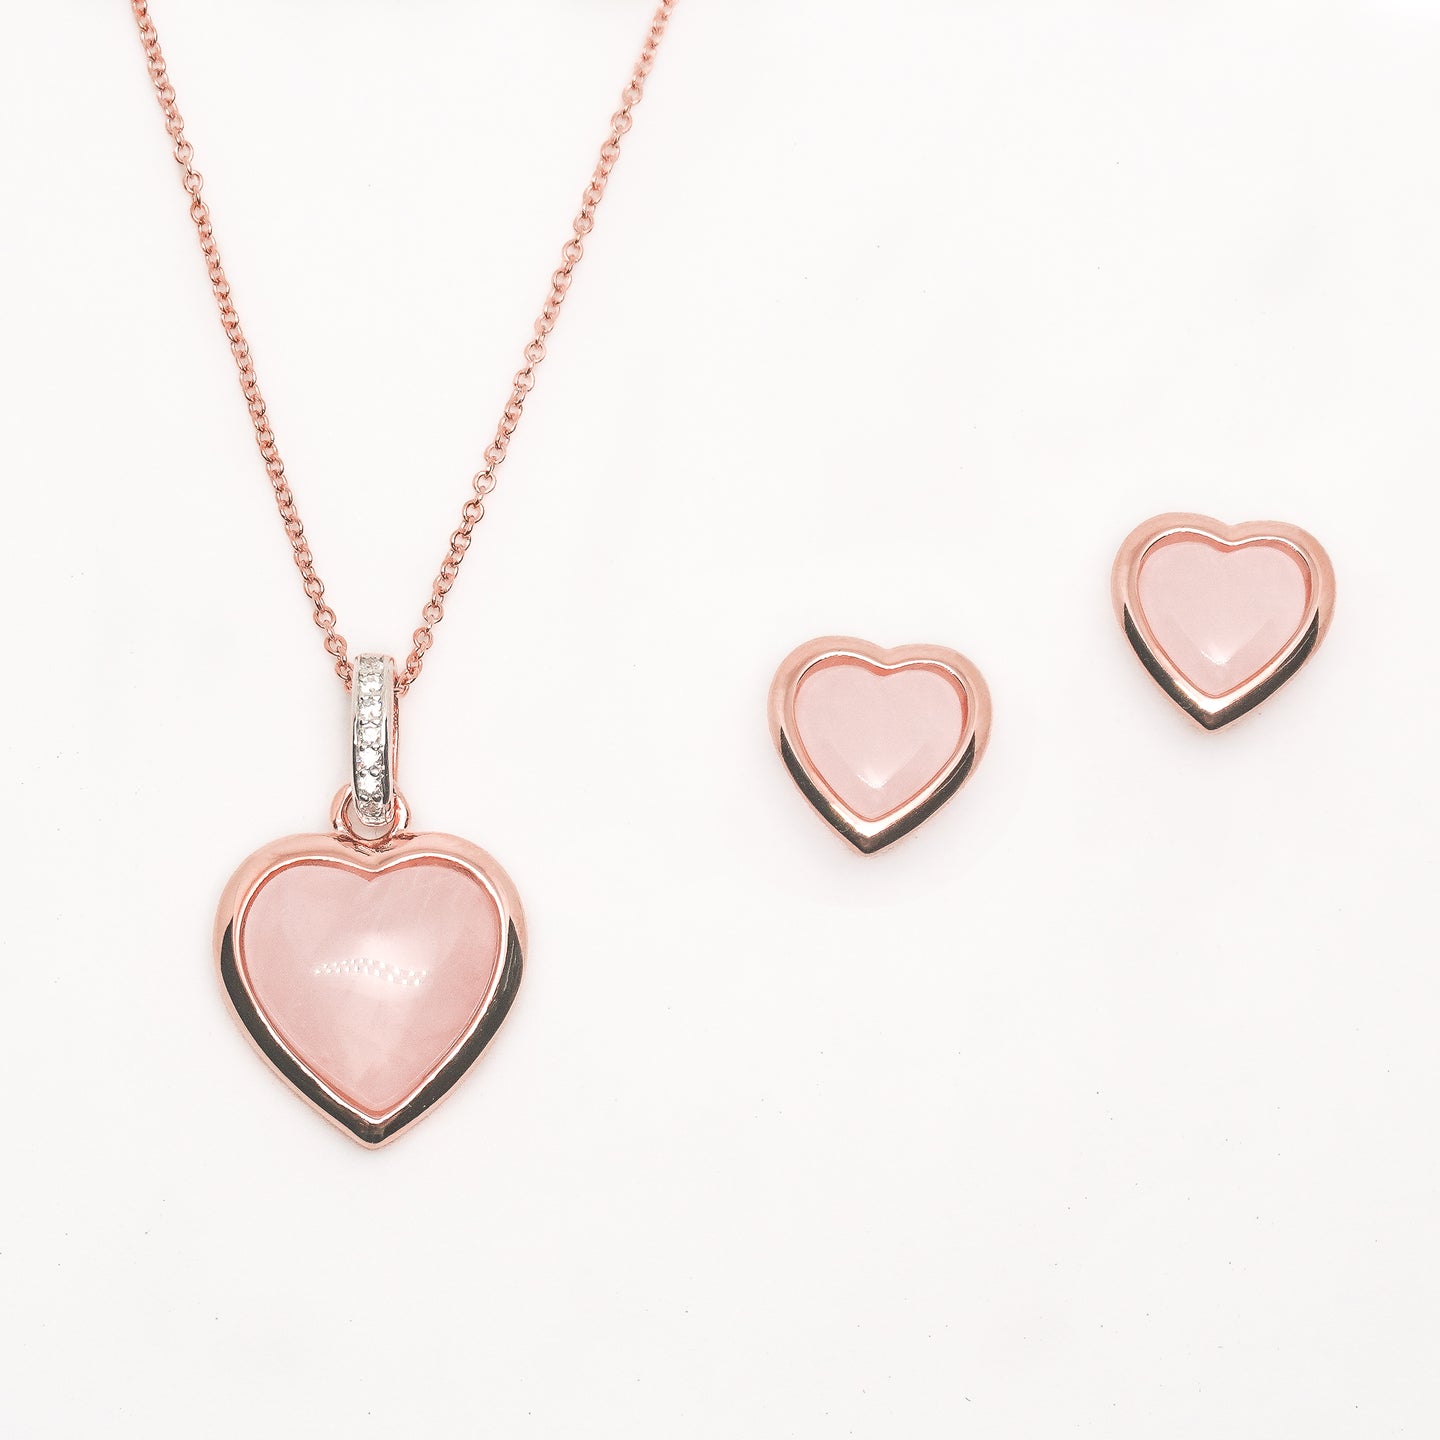 Rose Quartz Heart Necklace and Earrings Set | Rose Gold Vermeil on Sterling Silver